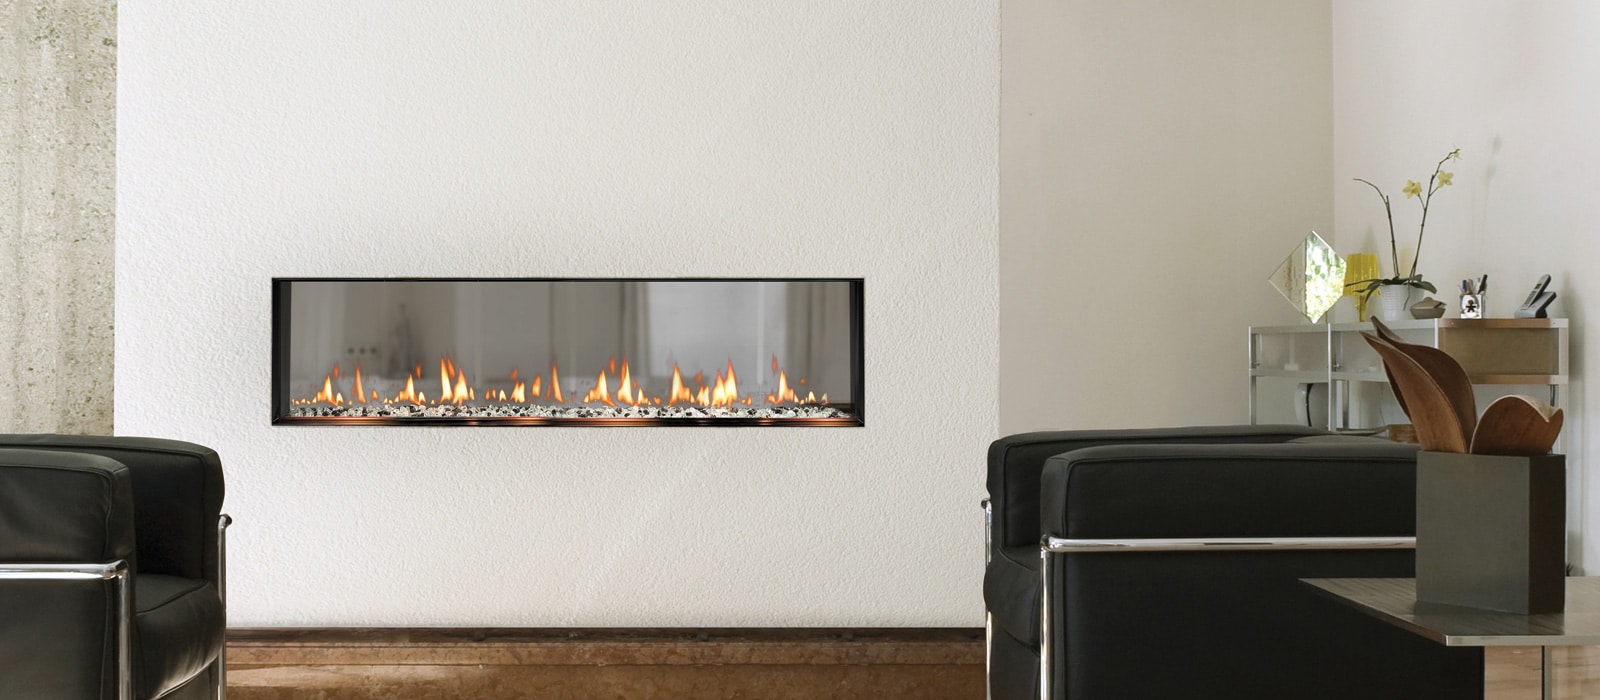 Solas see-through gas fireplace